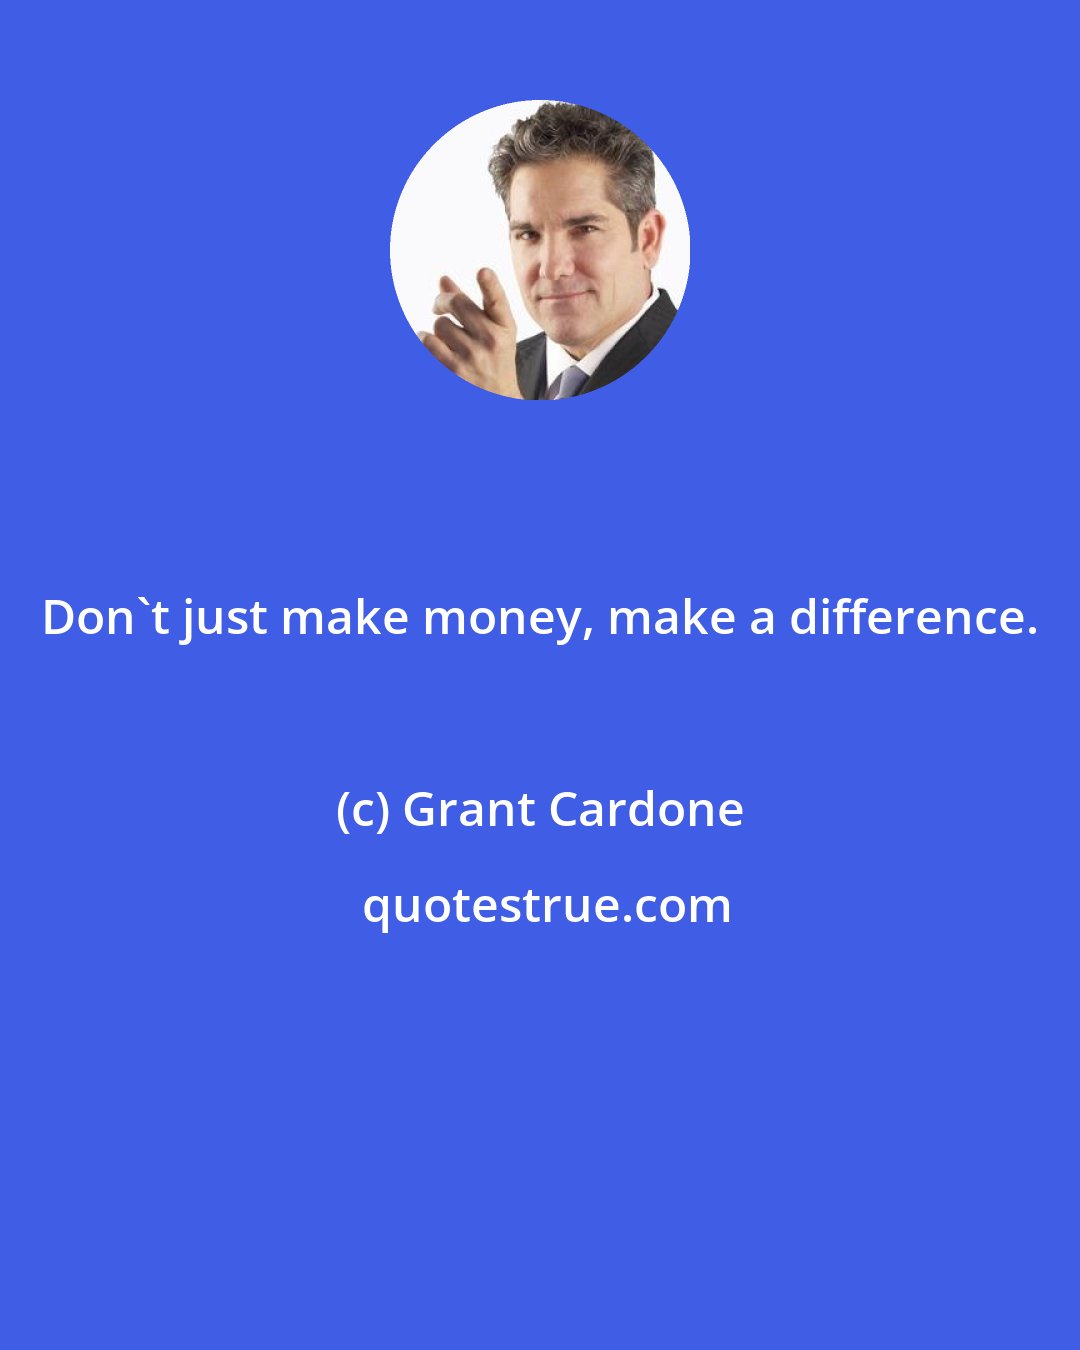 Grant Cardone: Don't just make money, make a difference.